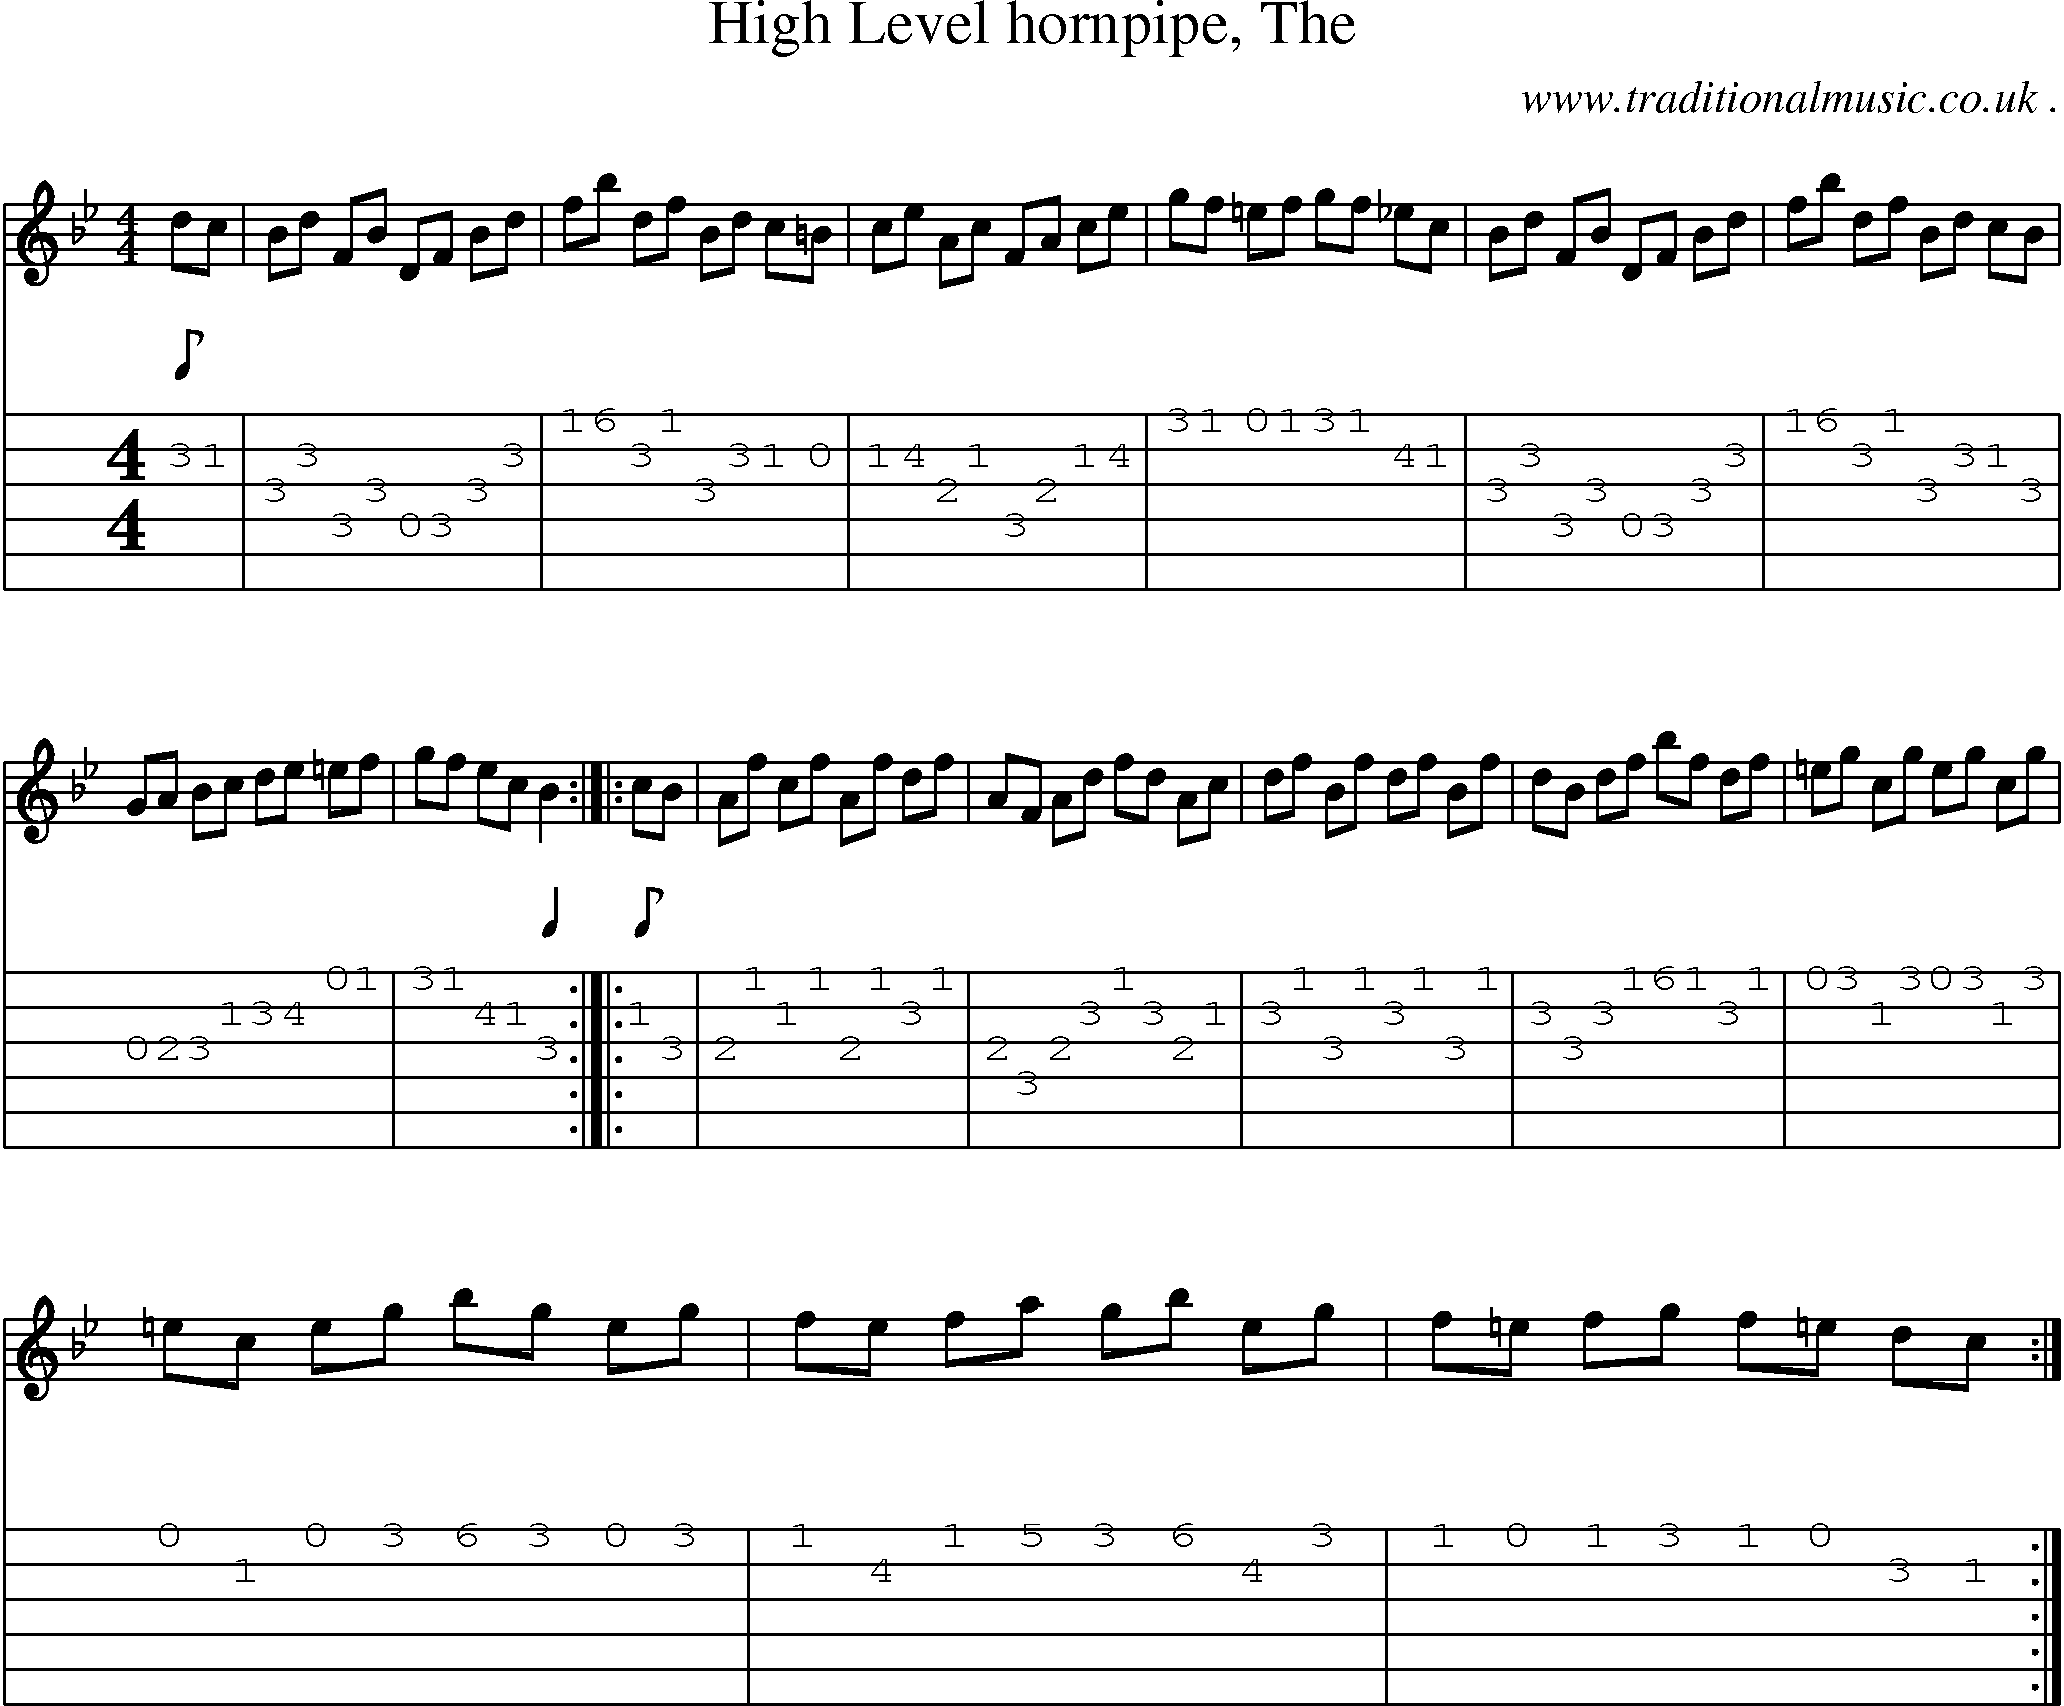 Sheet-music  score, Chords and Guitar Tabs for High Level Hornpipe The